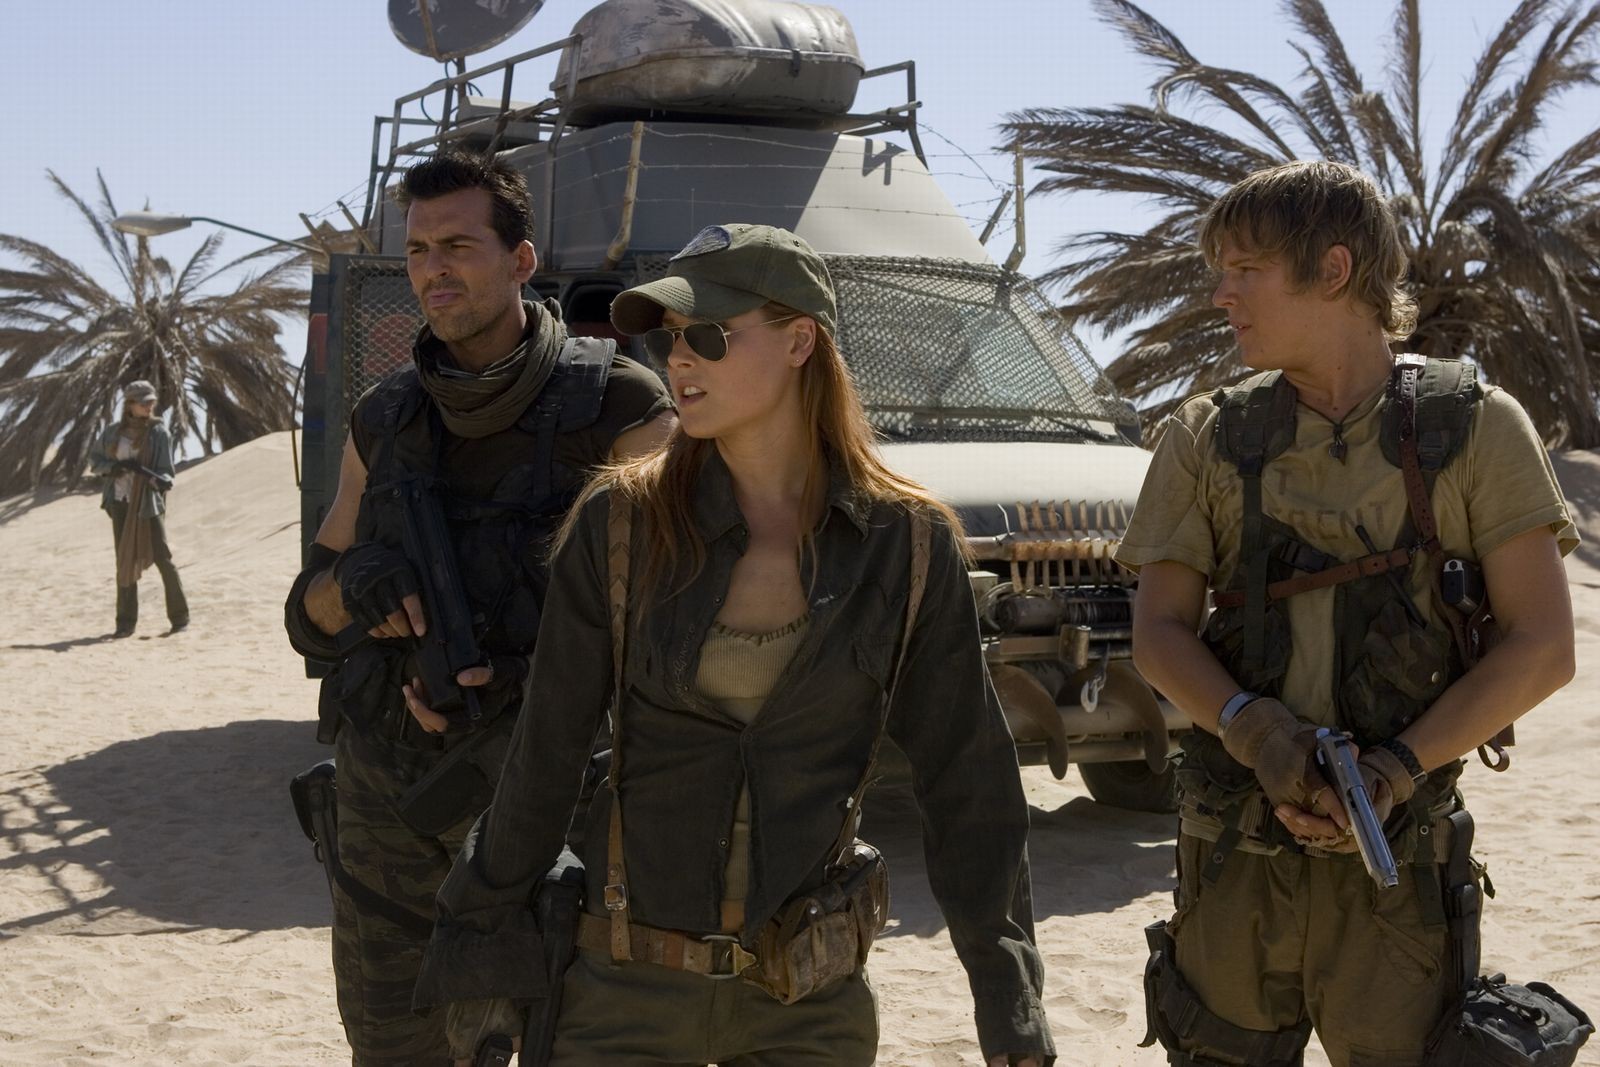 Ali Larter looks very hot wearing a military outfit in 'Resident Evil: Extinctio #75233969